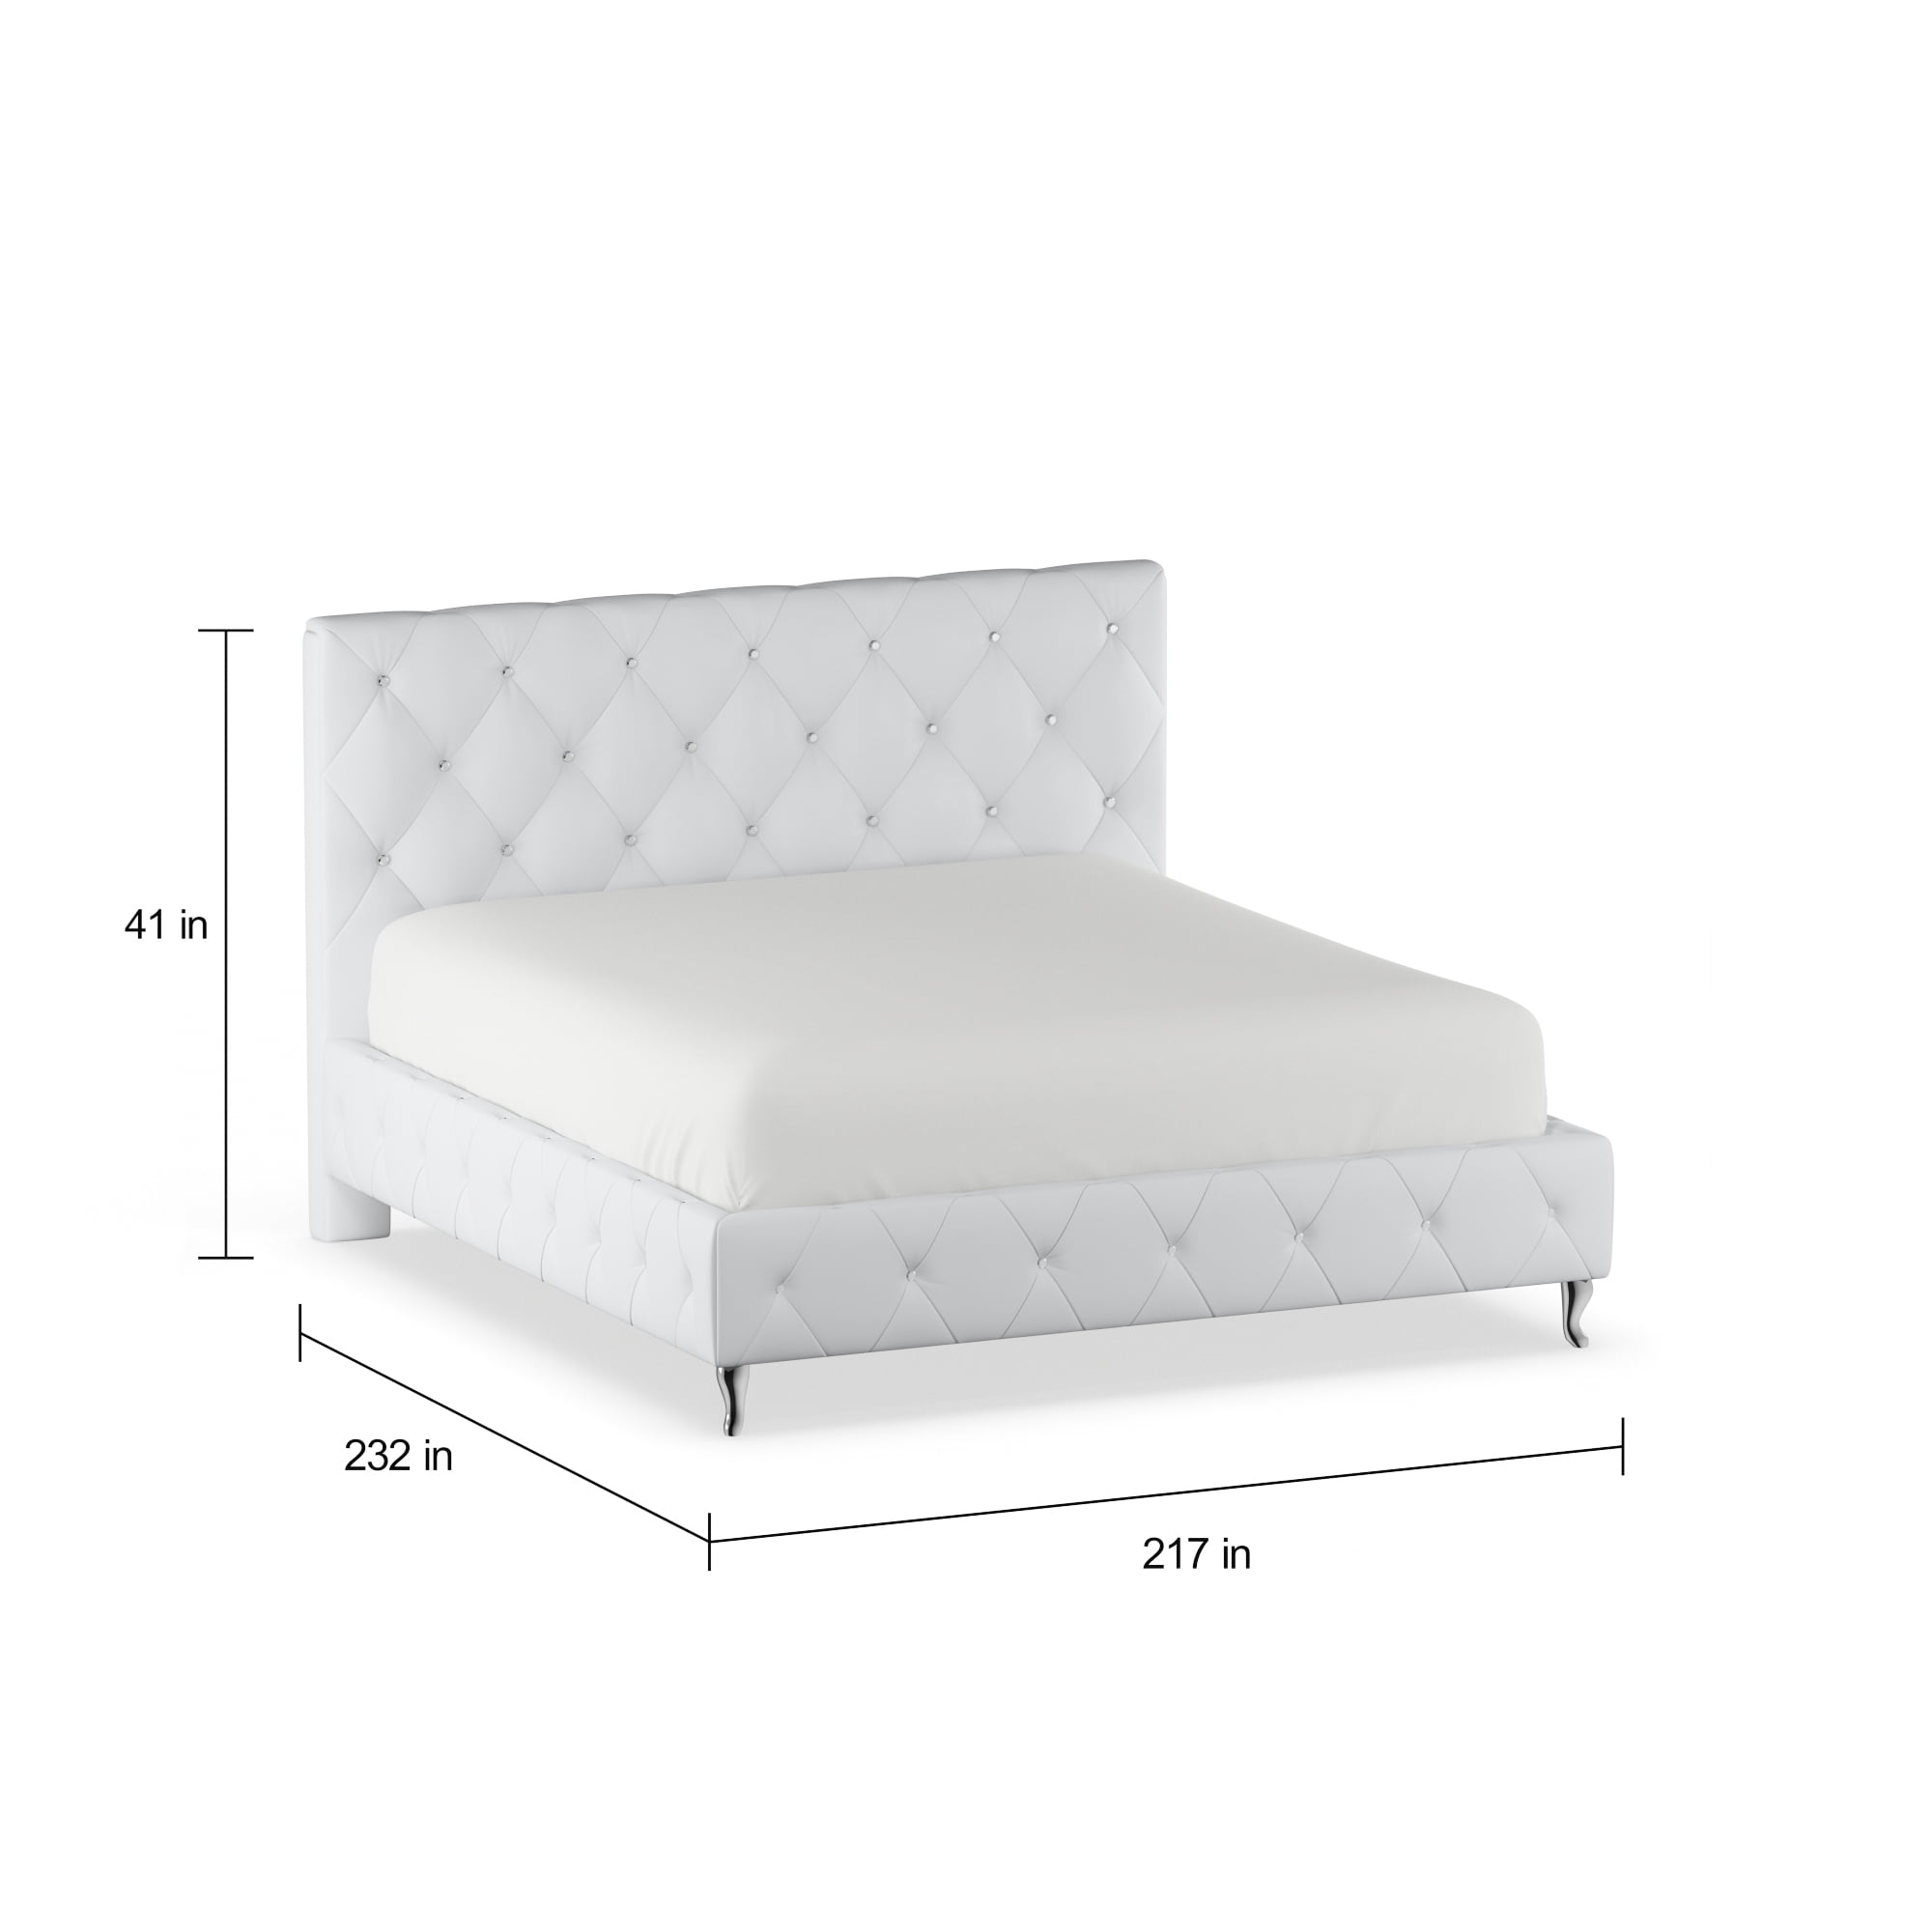 Martina bed with off-white shearling removable cover for 160 x 200 cm  mattress